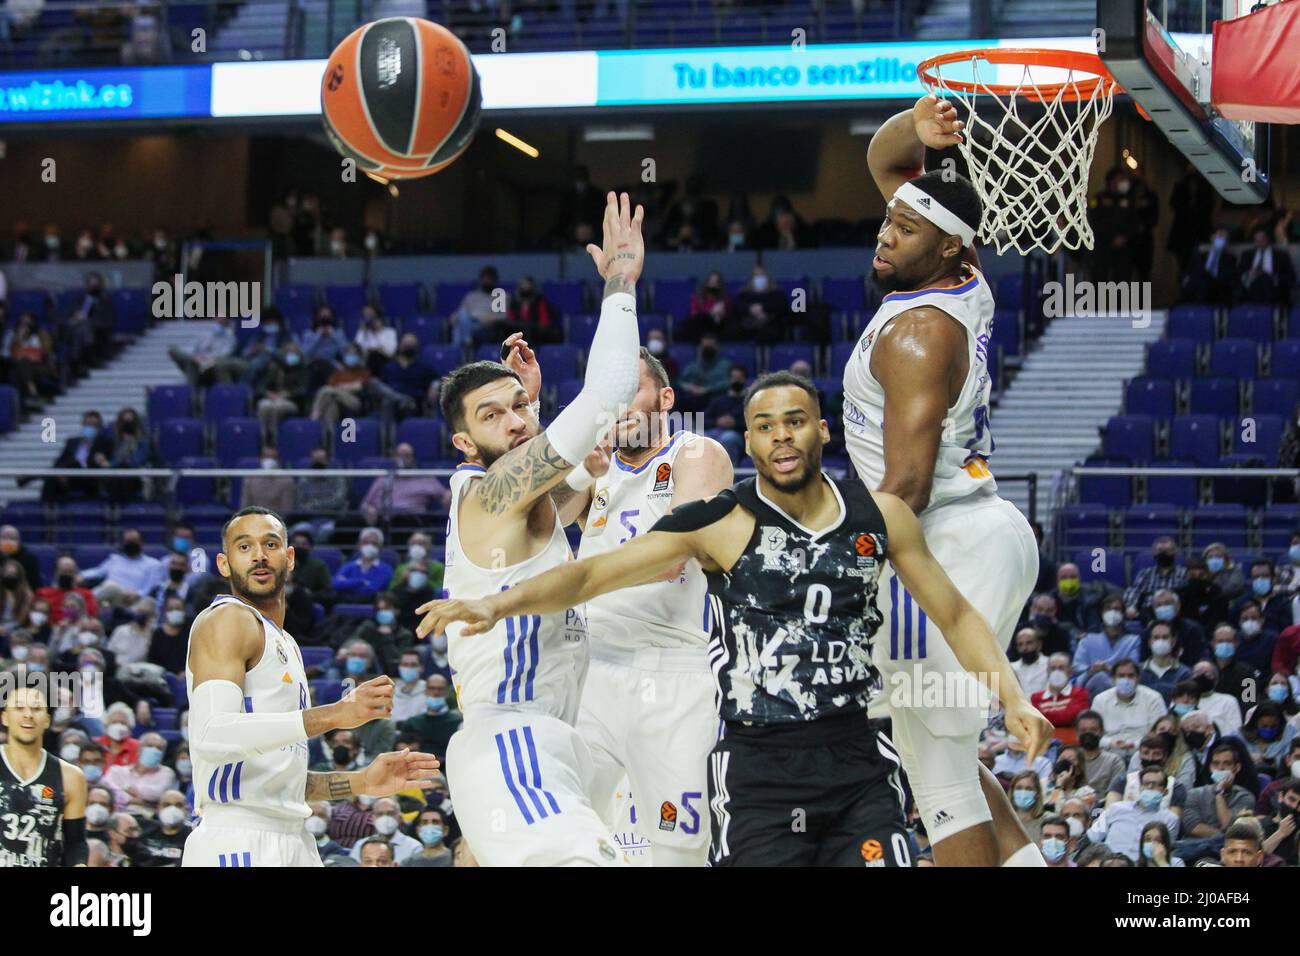 Madrid, Spain. 17th Mar, 2022. Vincent Poirier of Real Madrid, Elie Okobo of Asvel Lyon-Villeurbanne and Guerschon Yabusele of Real Madrid during the Turkish Airlines Euroleague basketball match between Real Madrid and Asvel Lyon-Villeurbanne on march 17, 2022 at Wizink Center in Madrid, Spain Credit: Independent Photo Agency/Alamy Live Newss Stock Photo